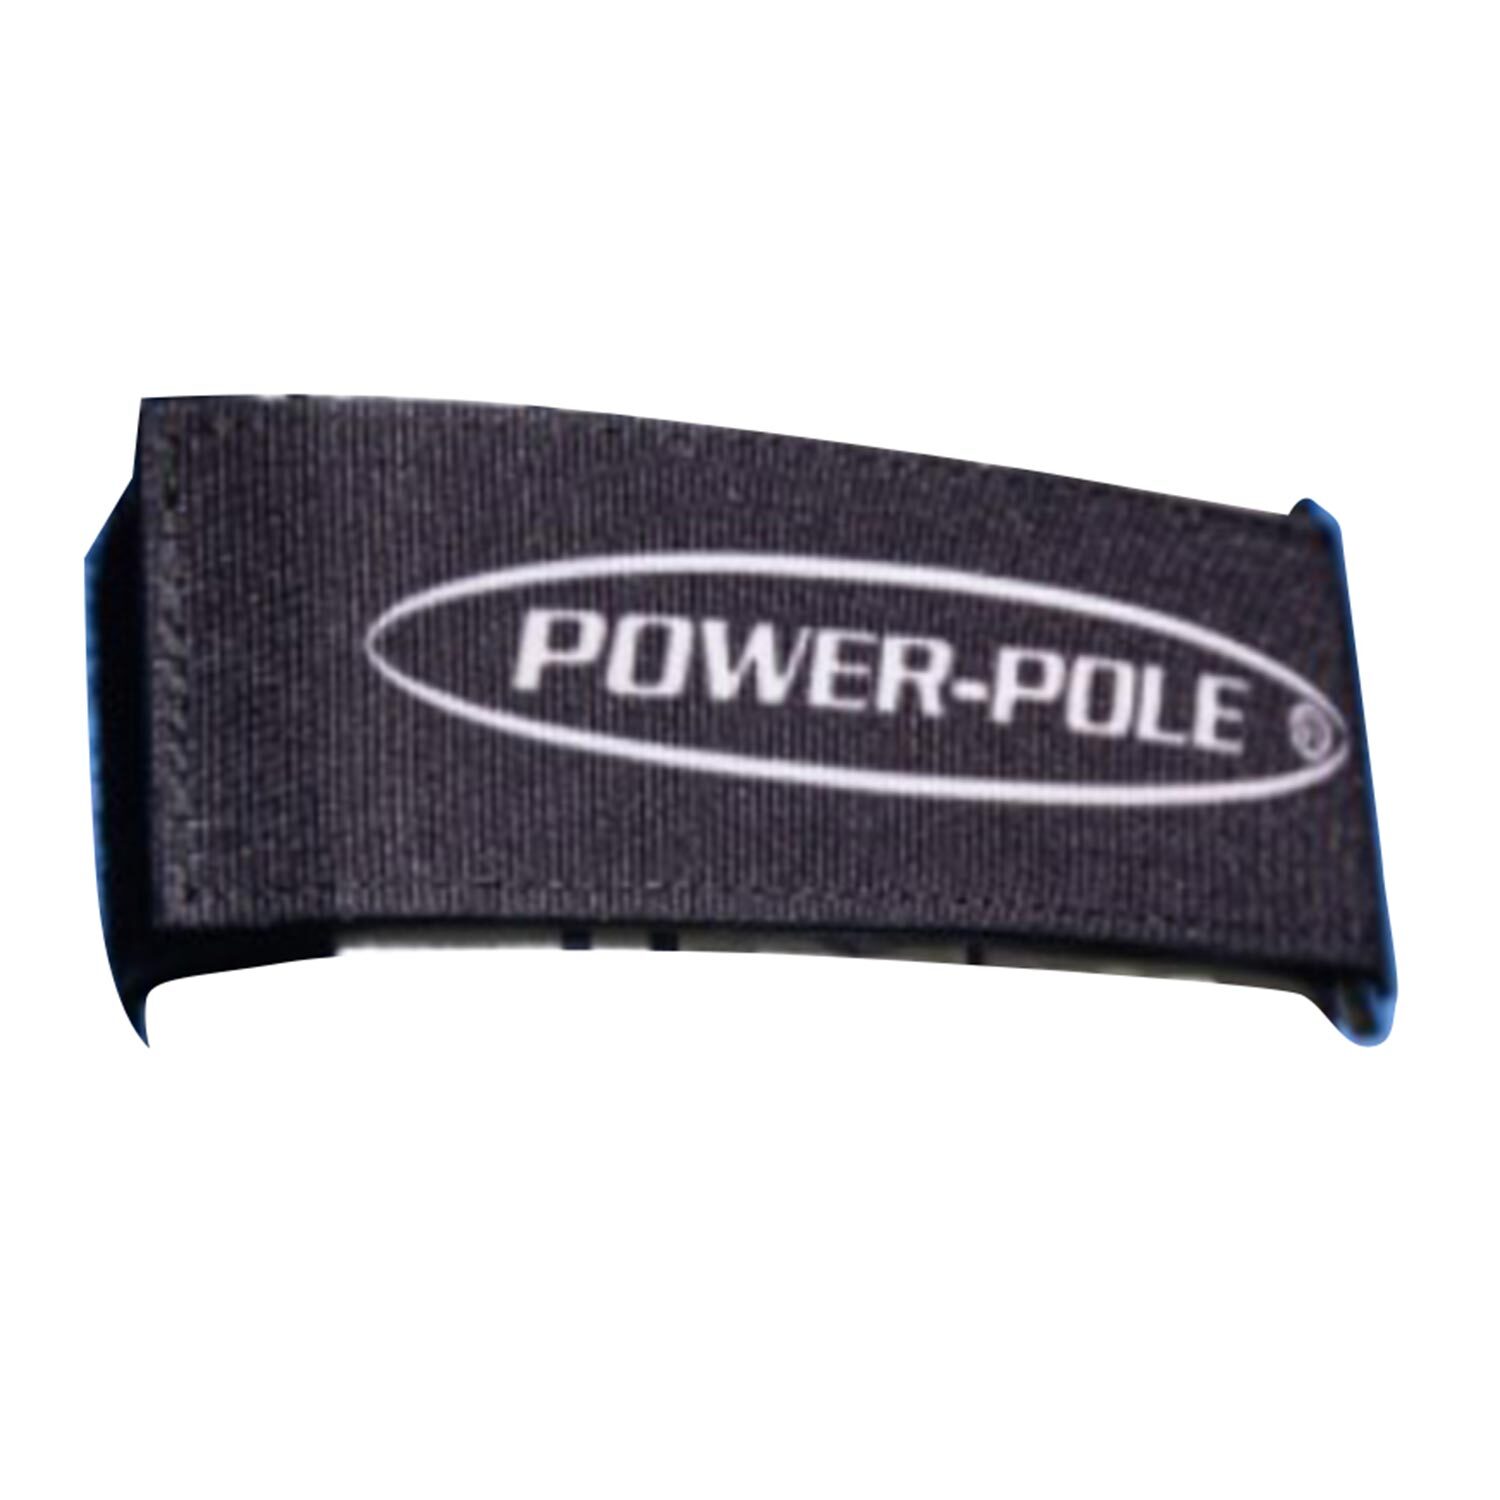 POWER-POLE Travel Strap For All Power-Pole Models